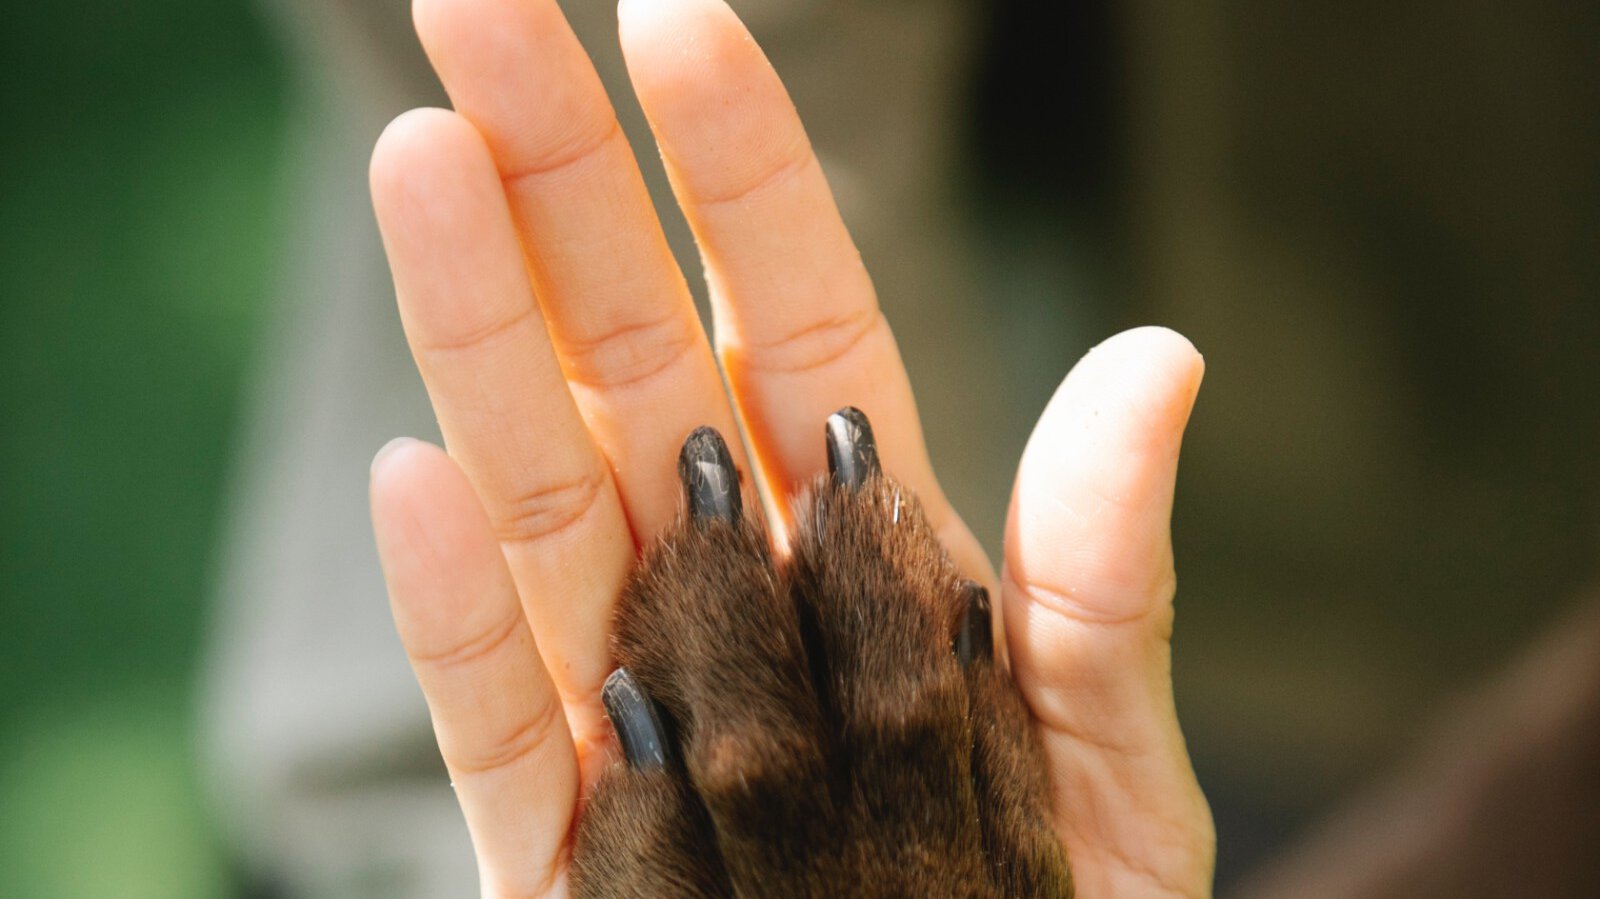 Dog paw inside of person's hand